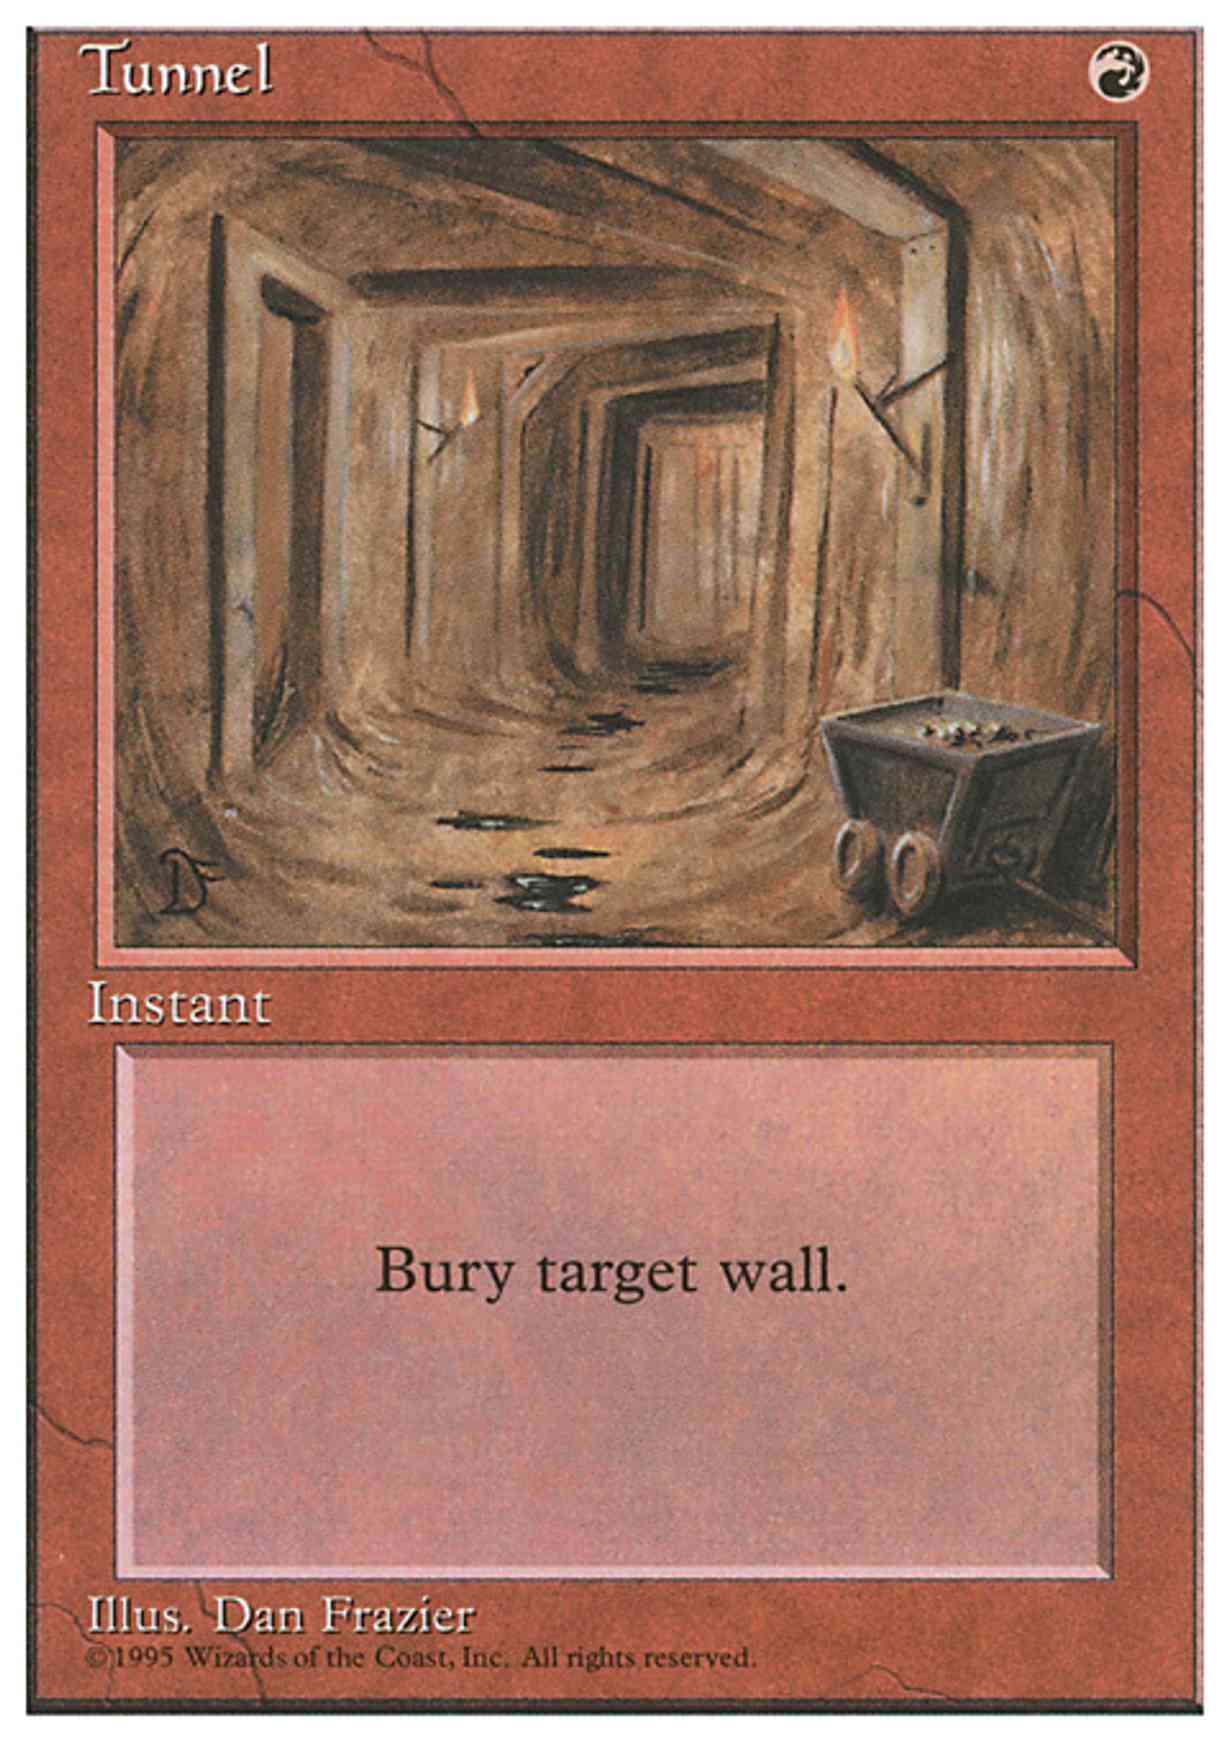 Tunnel magic card front